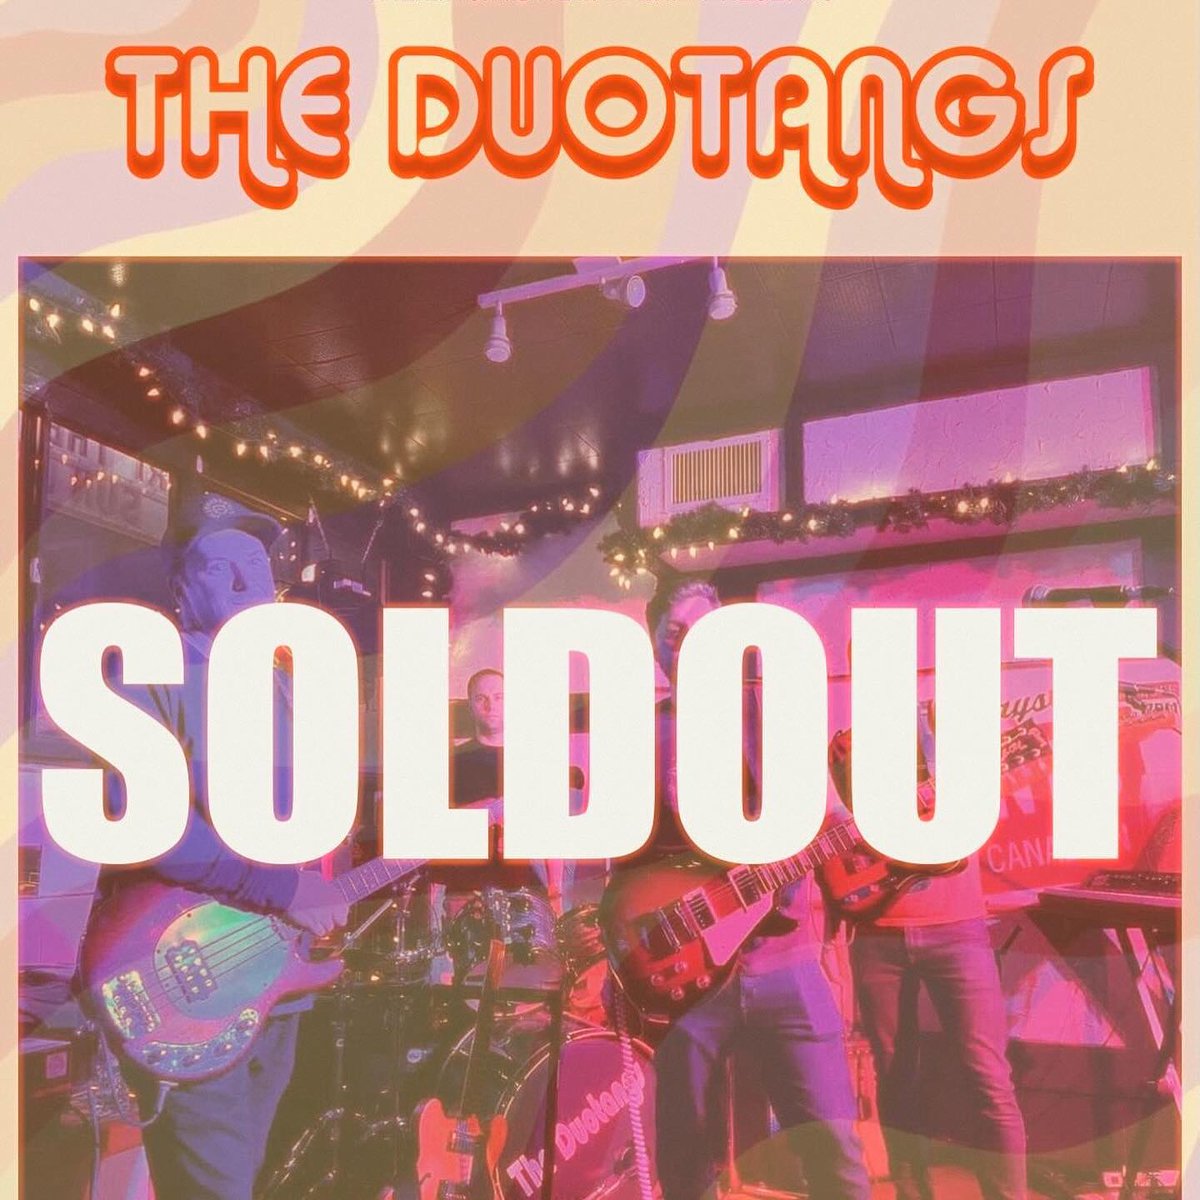 Another Sold Out show at the Linsmore and this time it's with The Duotangs! Get ready to party all night with this incredible cover band with a fun and unique set list! Let's go! @DanforthTweets @listenlocalTO @LiveMusicCda @EastYork_TO @ears2dground @blogTO @CP24 @nowtoronto